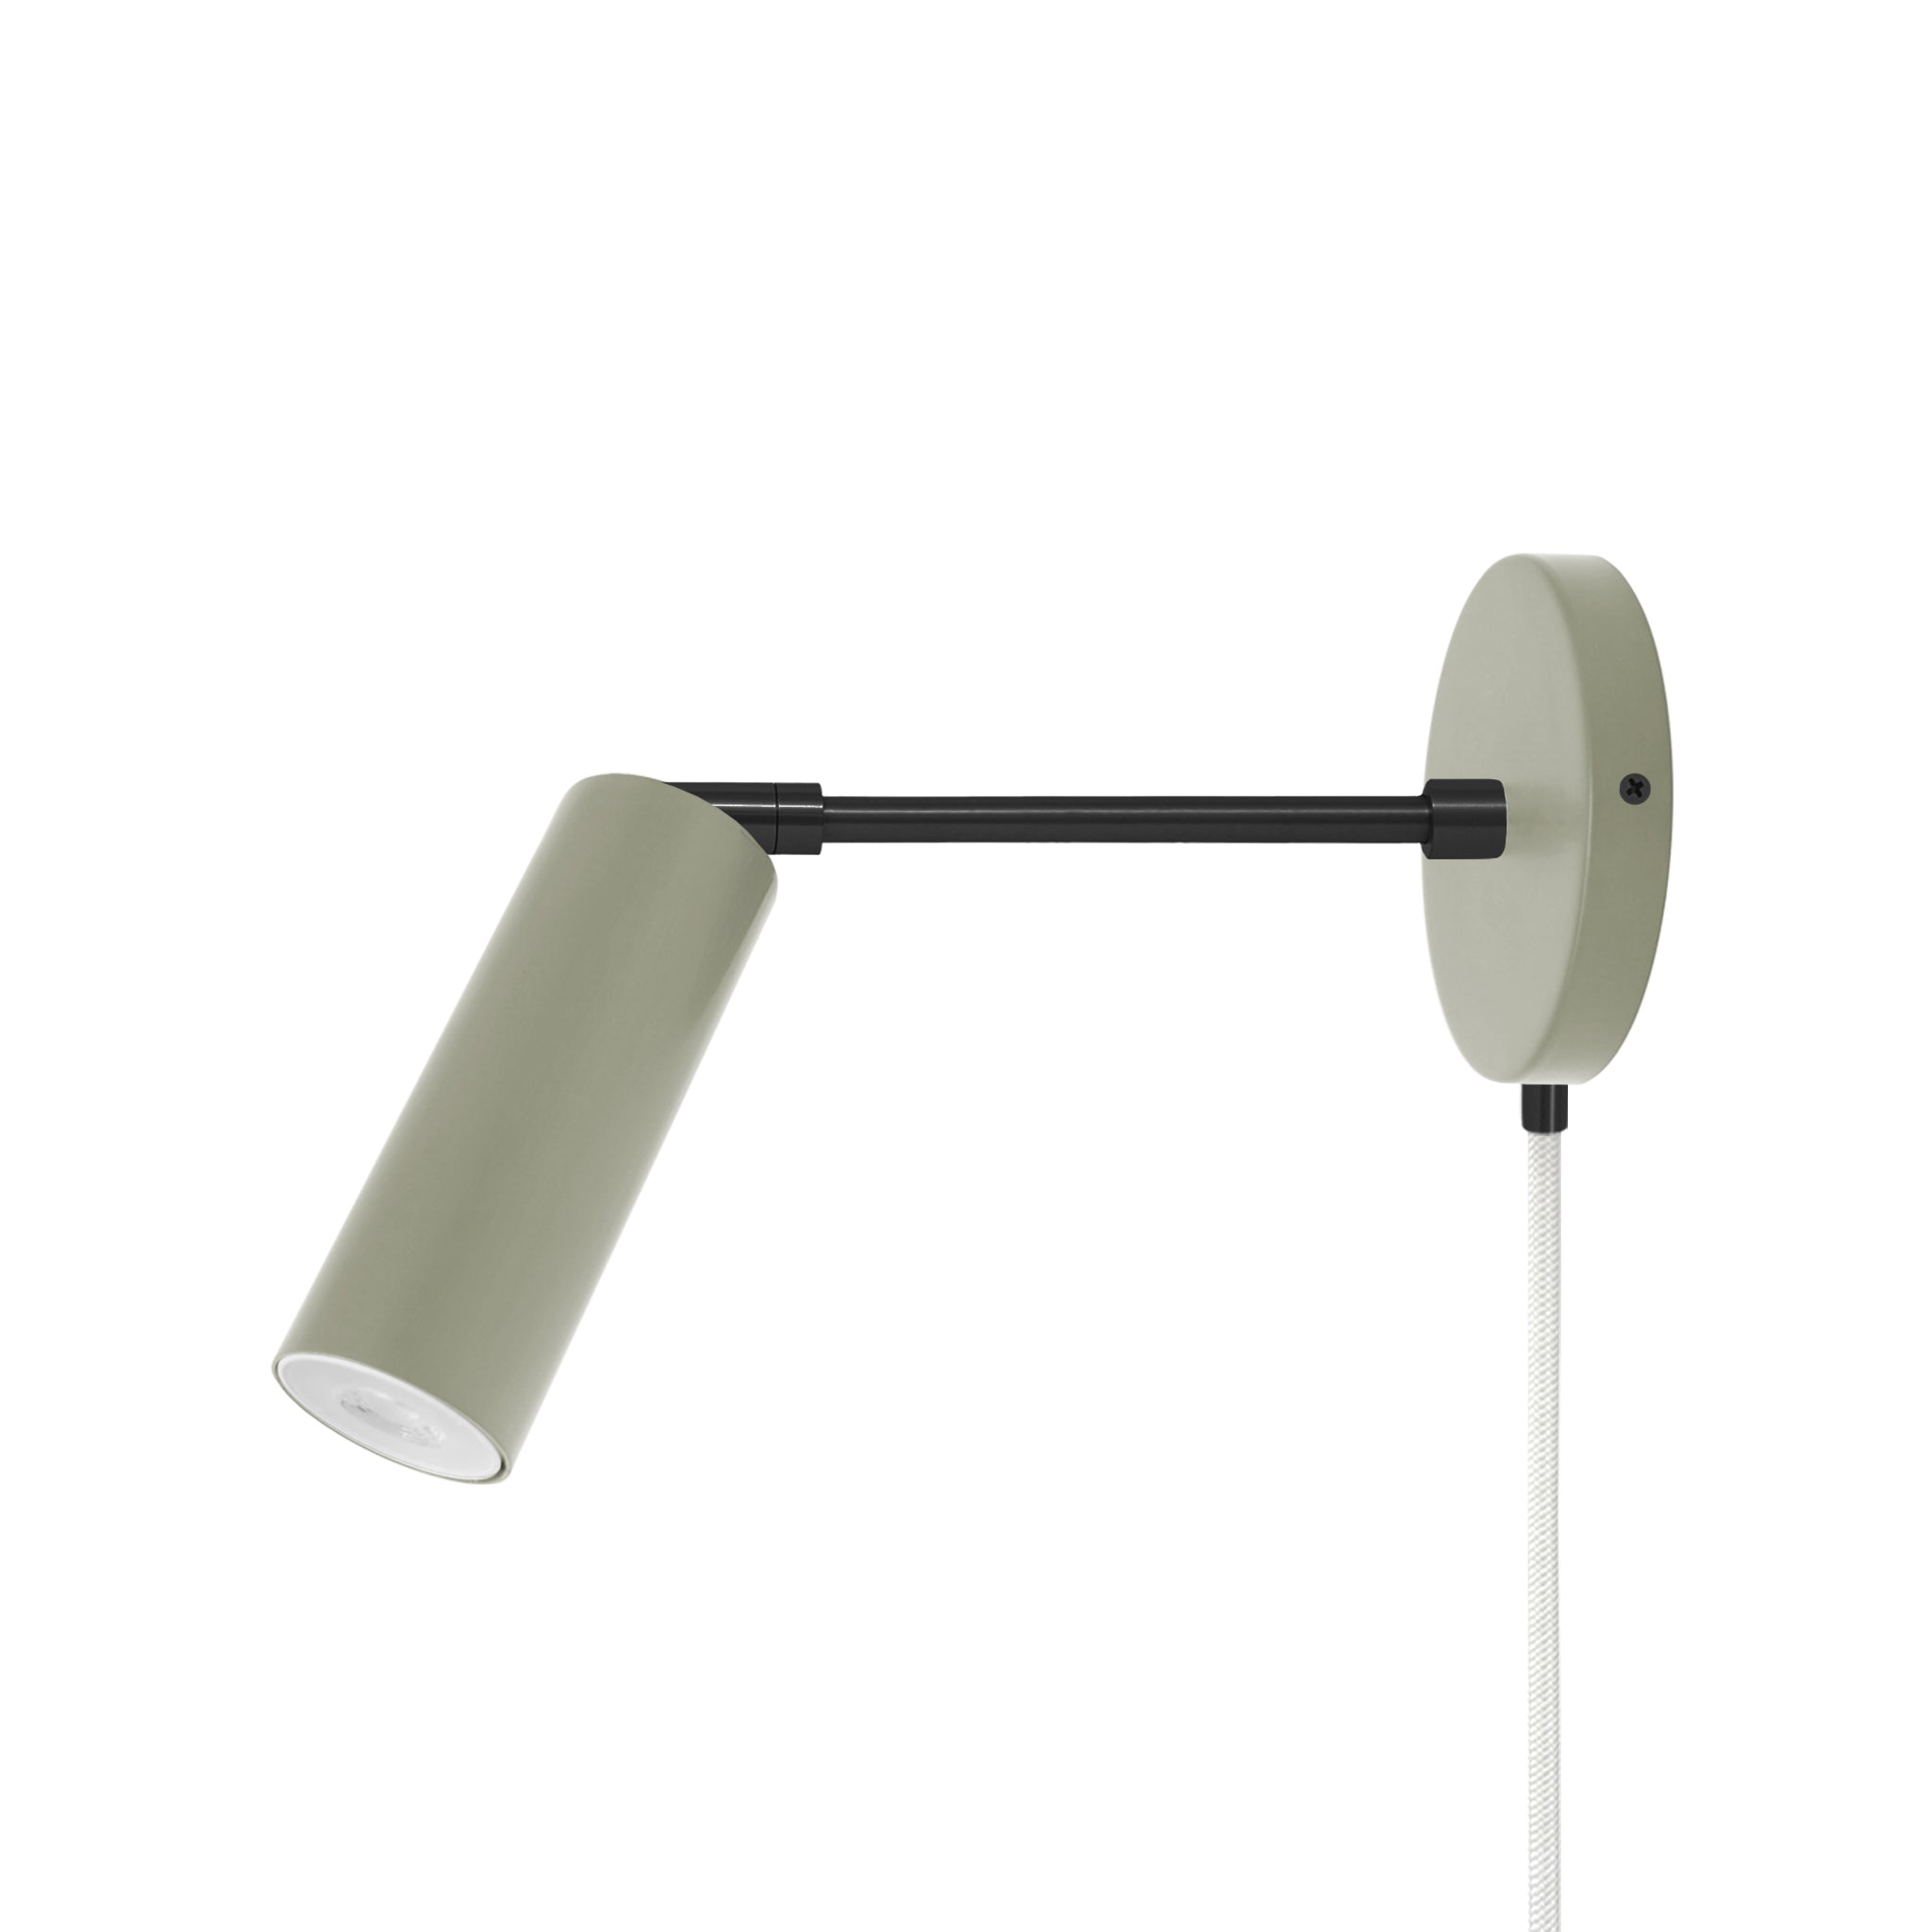 Black and spa color Reader plug-in sconce 6" arm Dutton Brown lighting